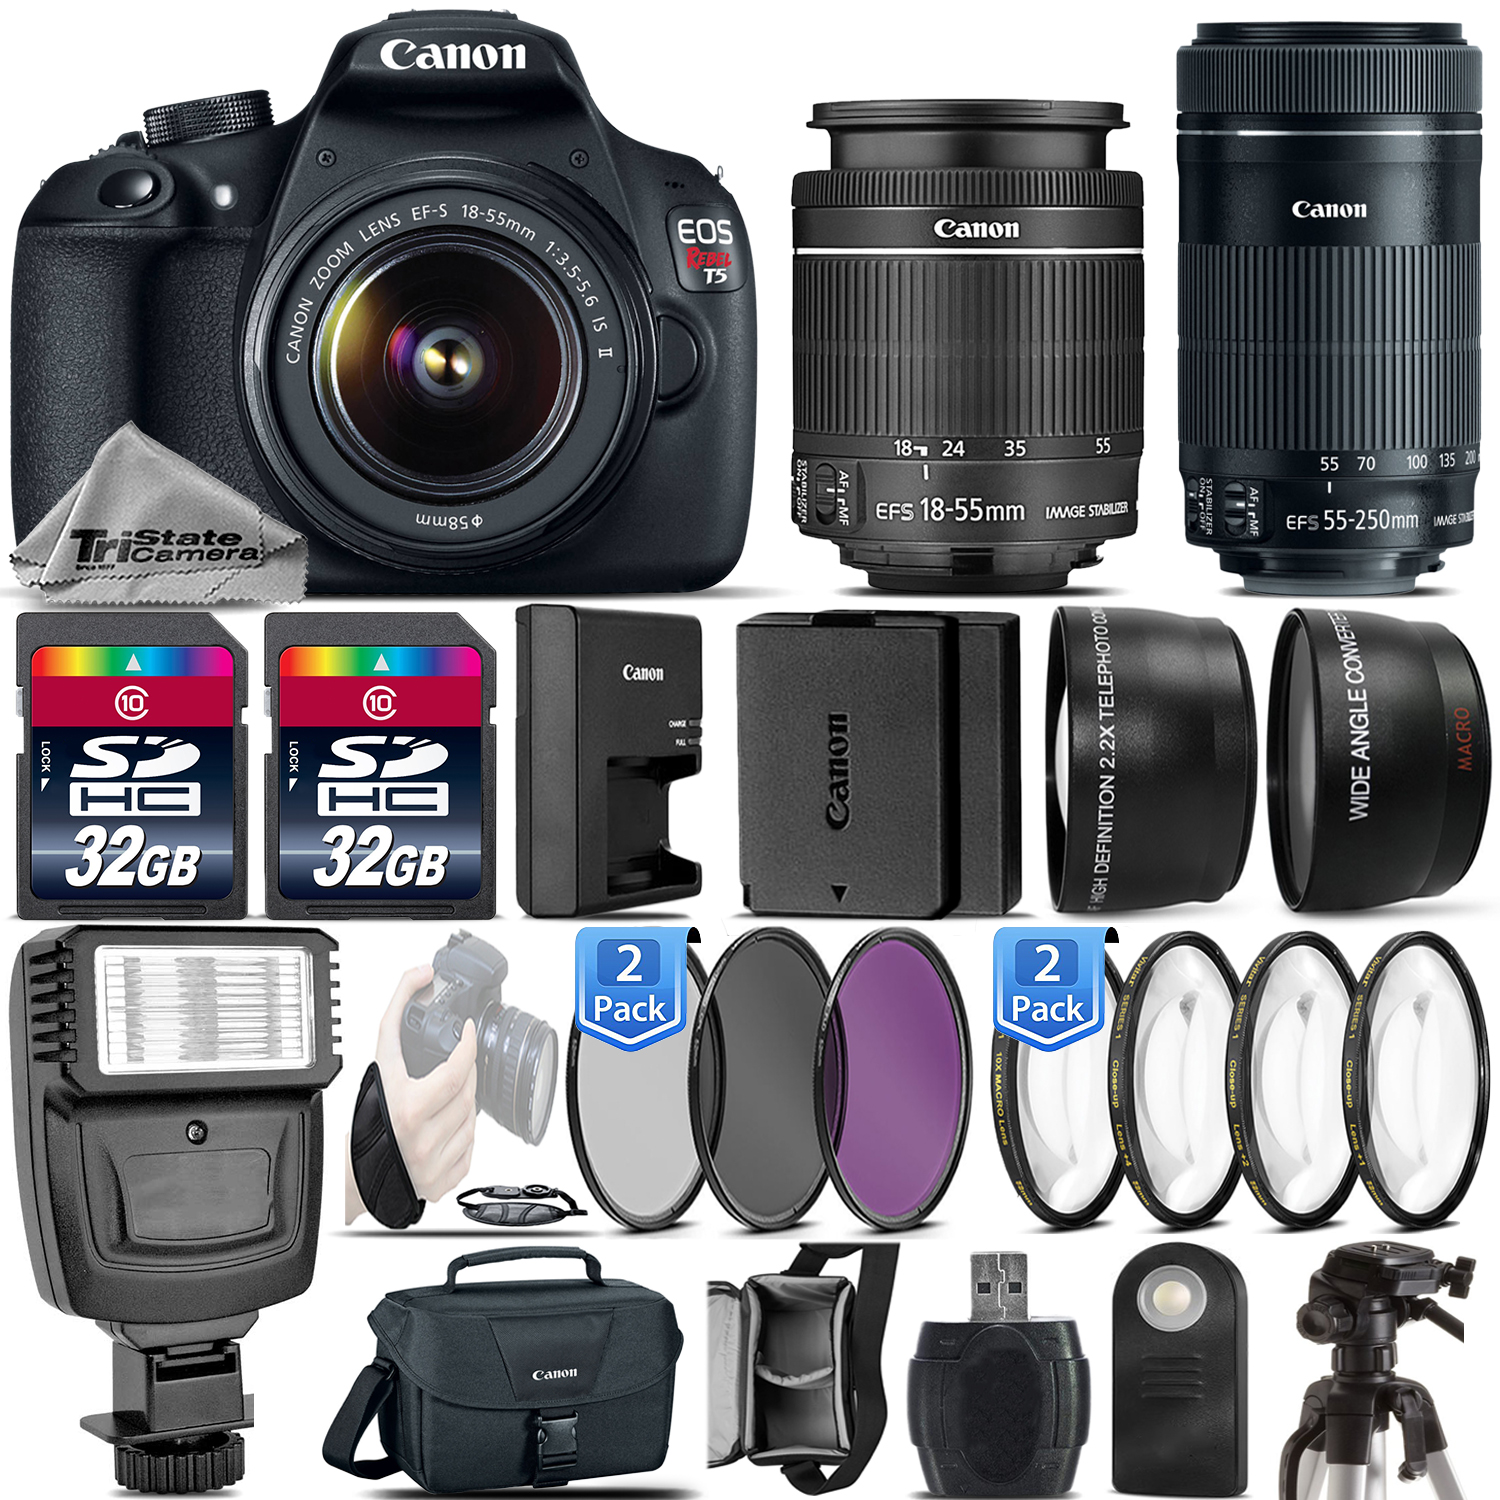 EOS Rebel T5 / 1200D DSLR Camera + 18-55mm IS + 55-250mm IS STM - 64GB Kit *FREE SHIPPING*